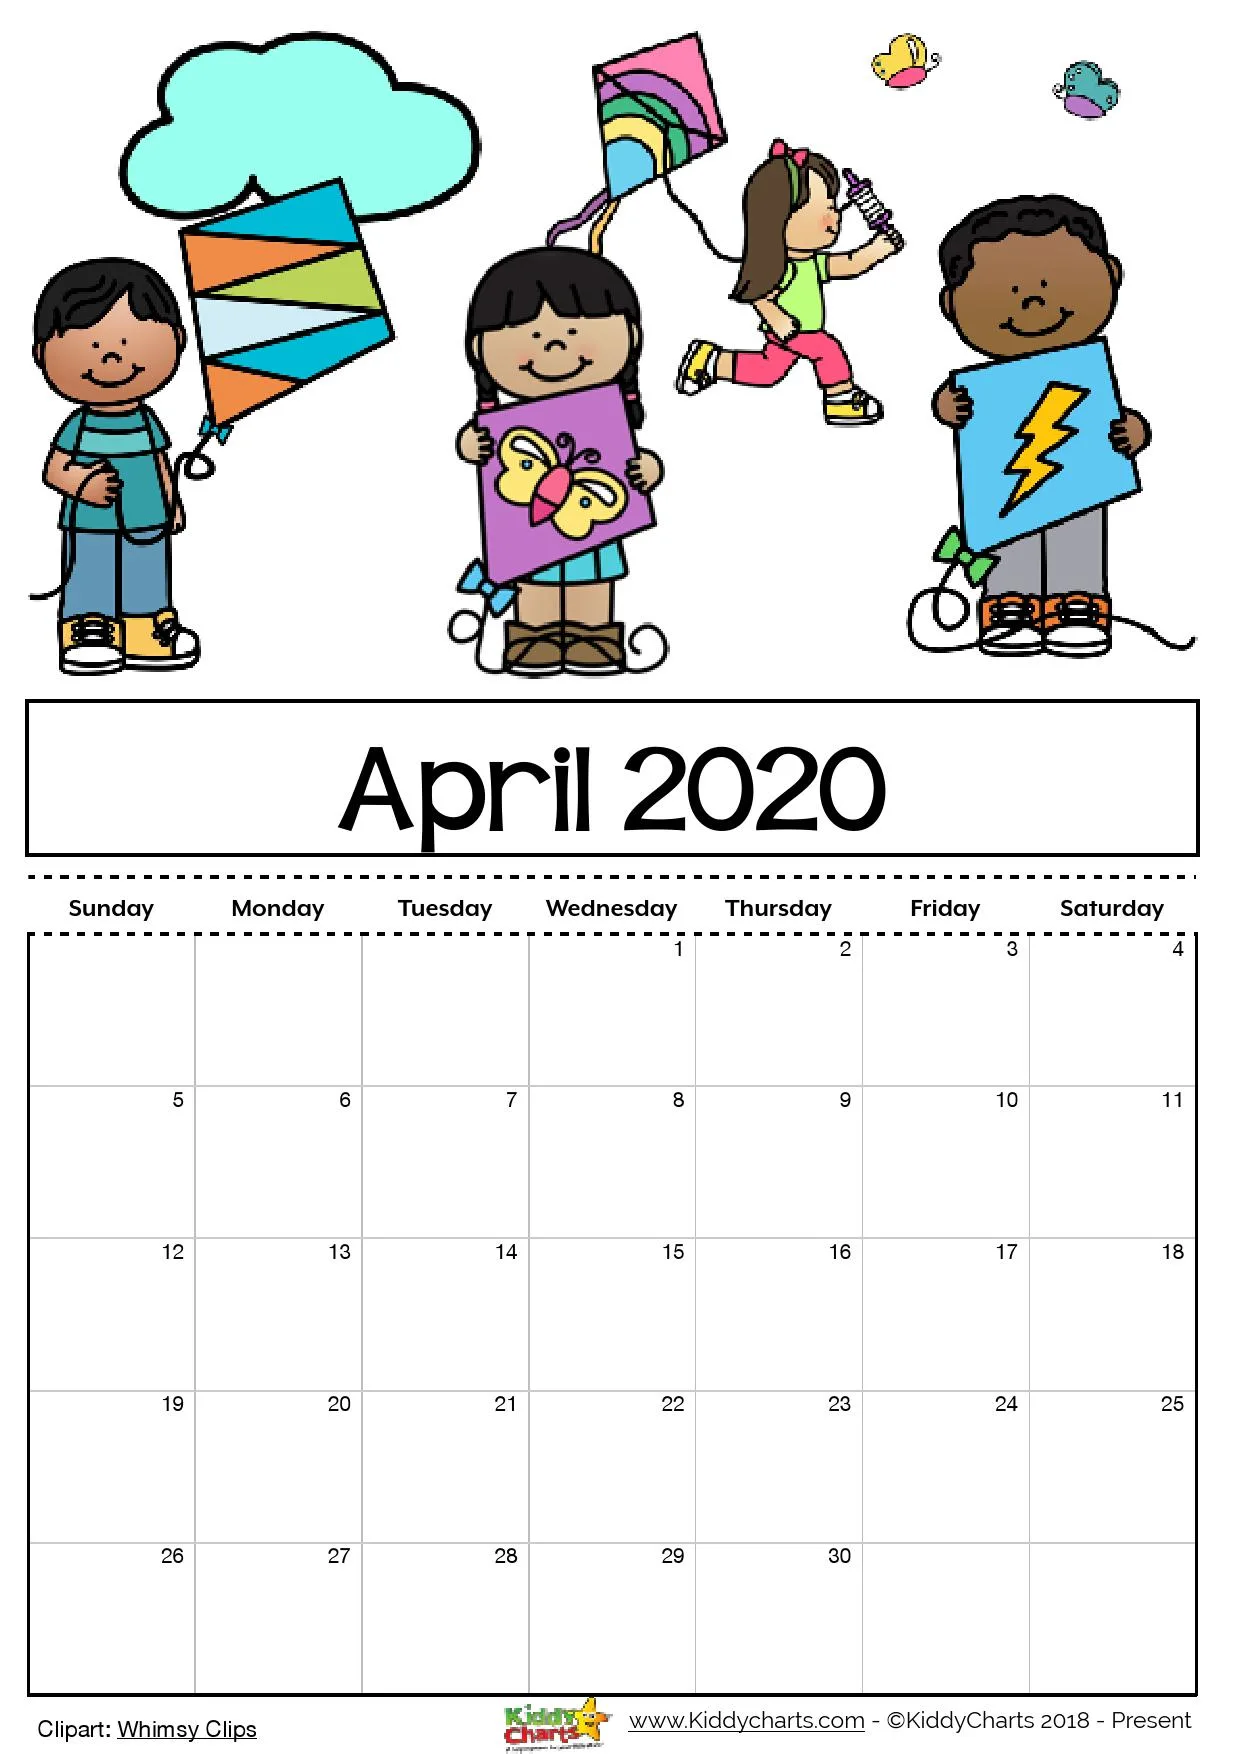 Looking for a free printable 2020 calendar? Then we've got it for you - come take a look now! #calendar2020 #printables #kidsprintables #calendars #kids